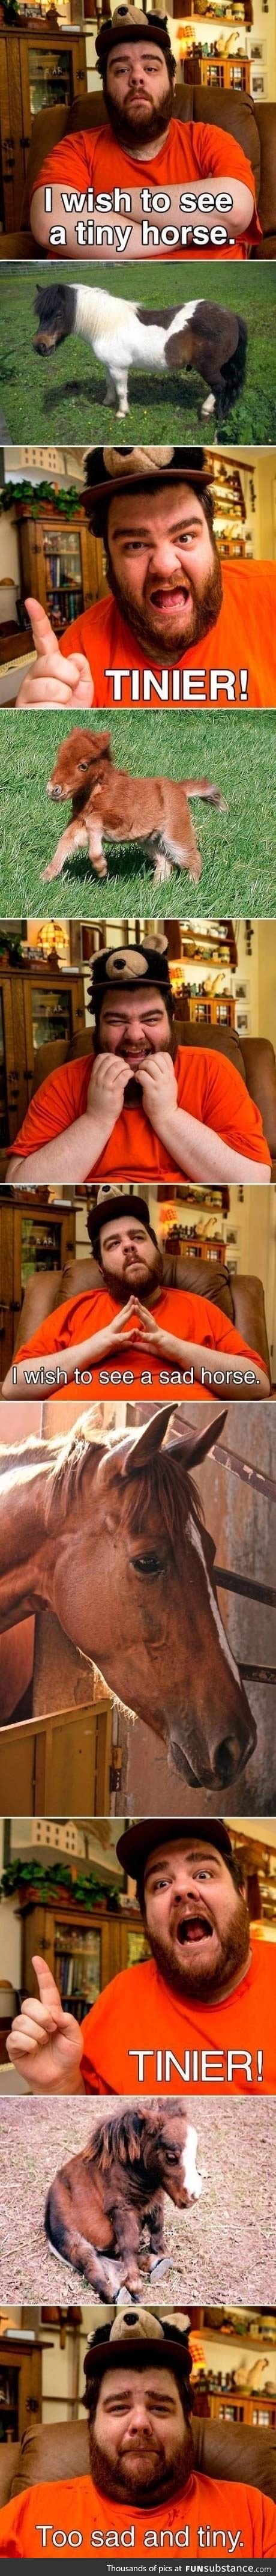 For the horse lovers out there